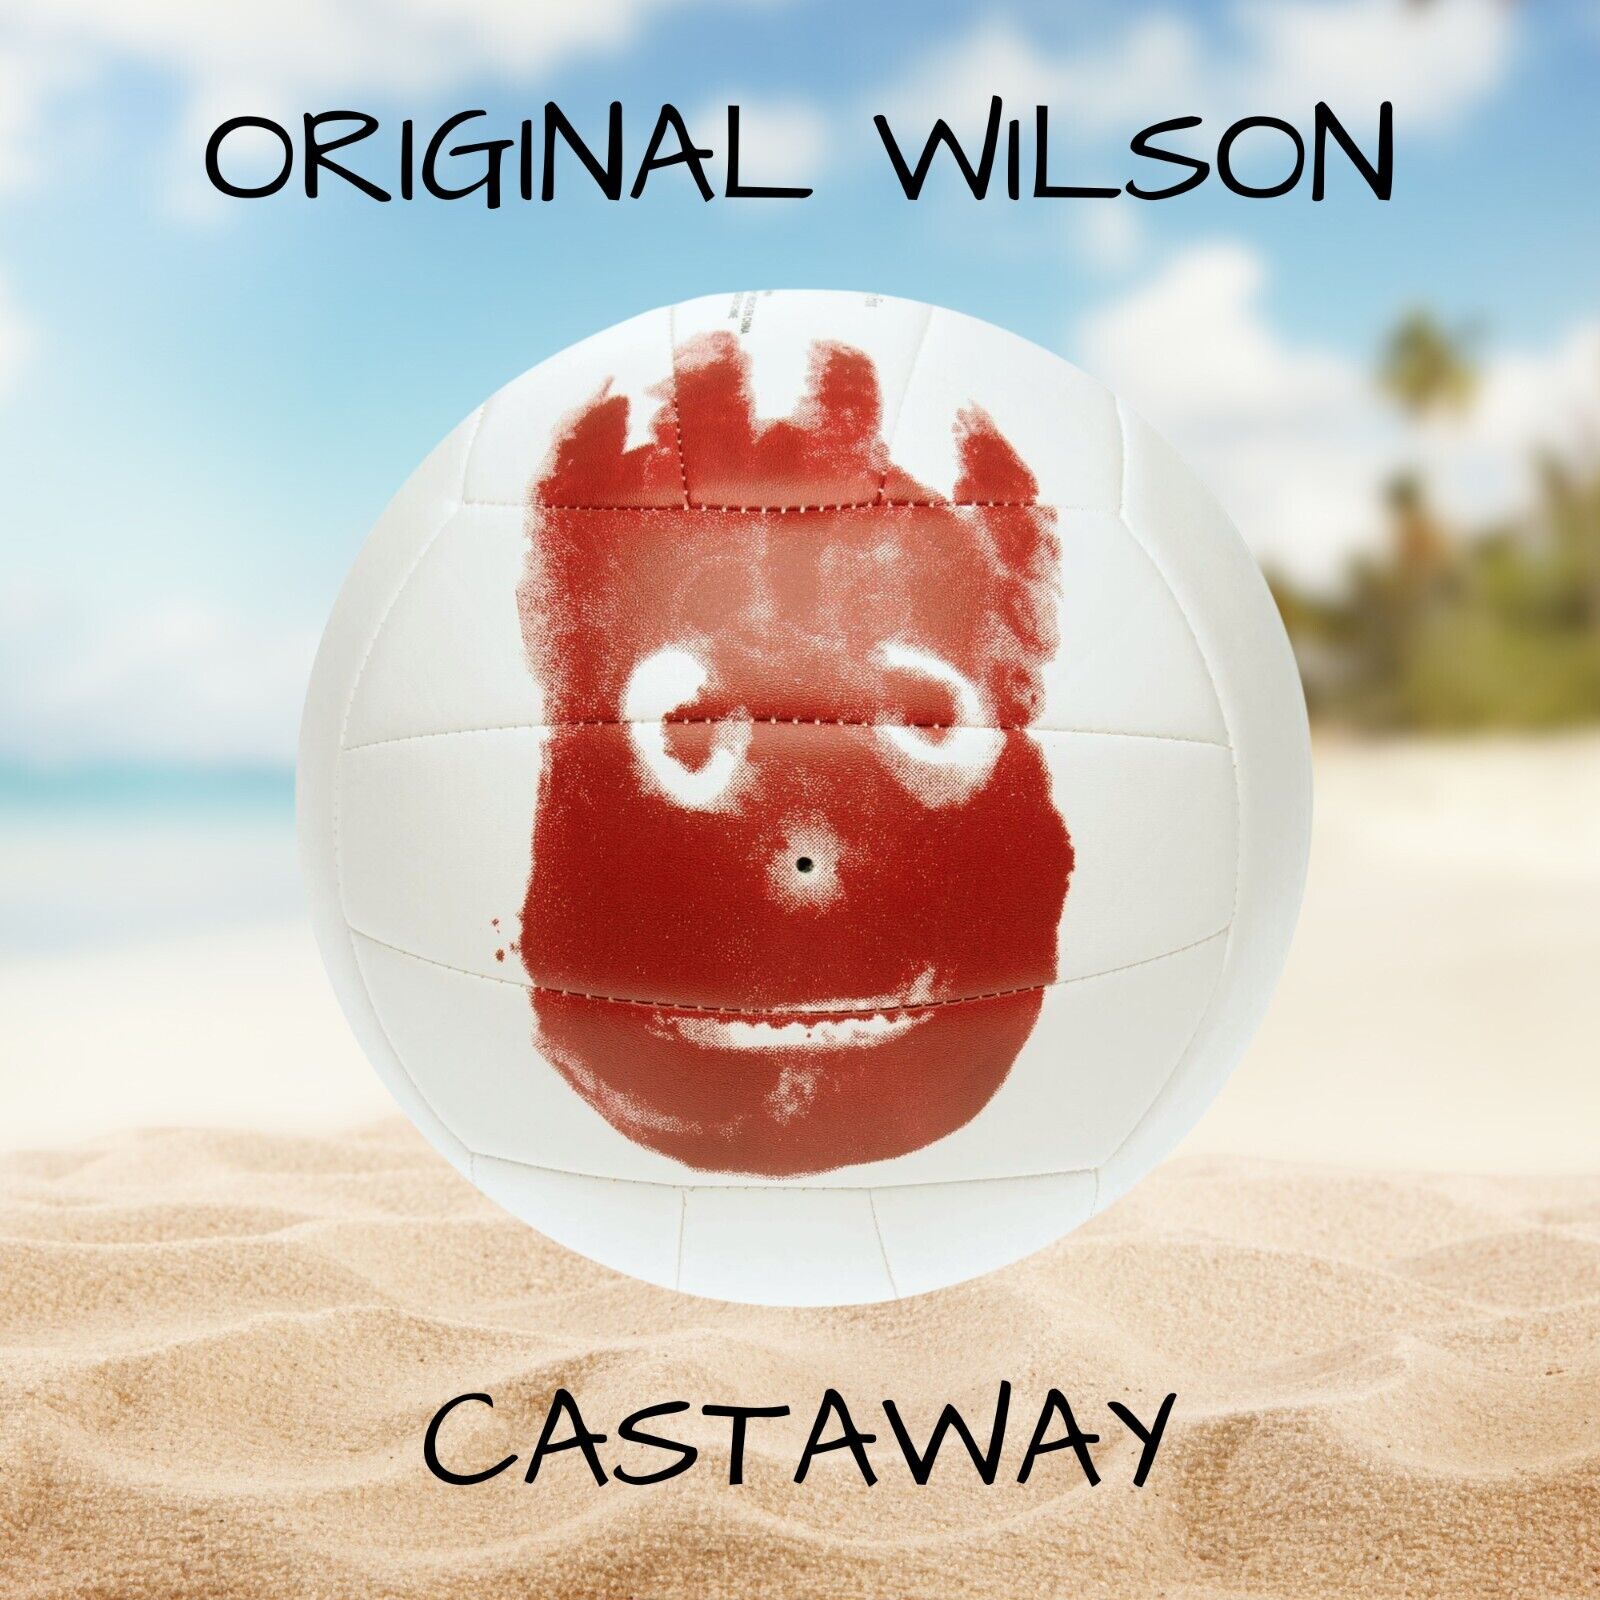 Mr Wilson Cast Away 2001 Volleyball AVP Official Game Ball Collectible Hand Face